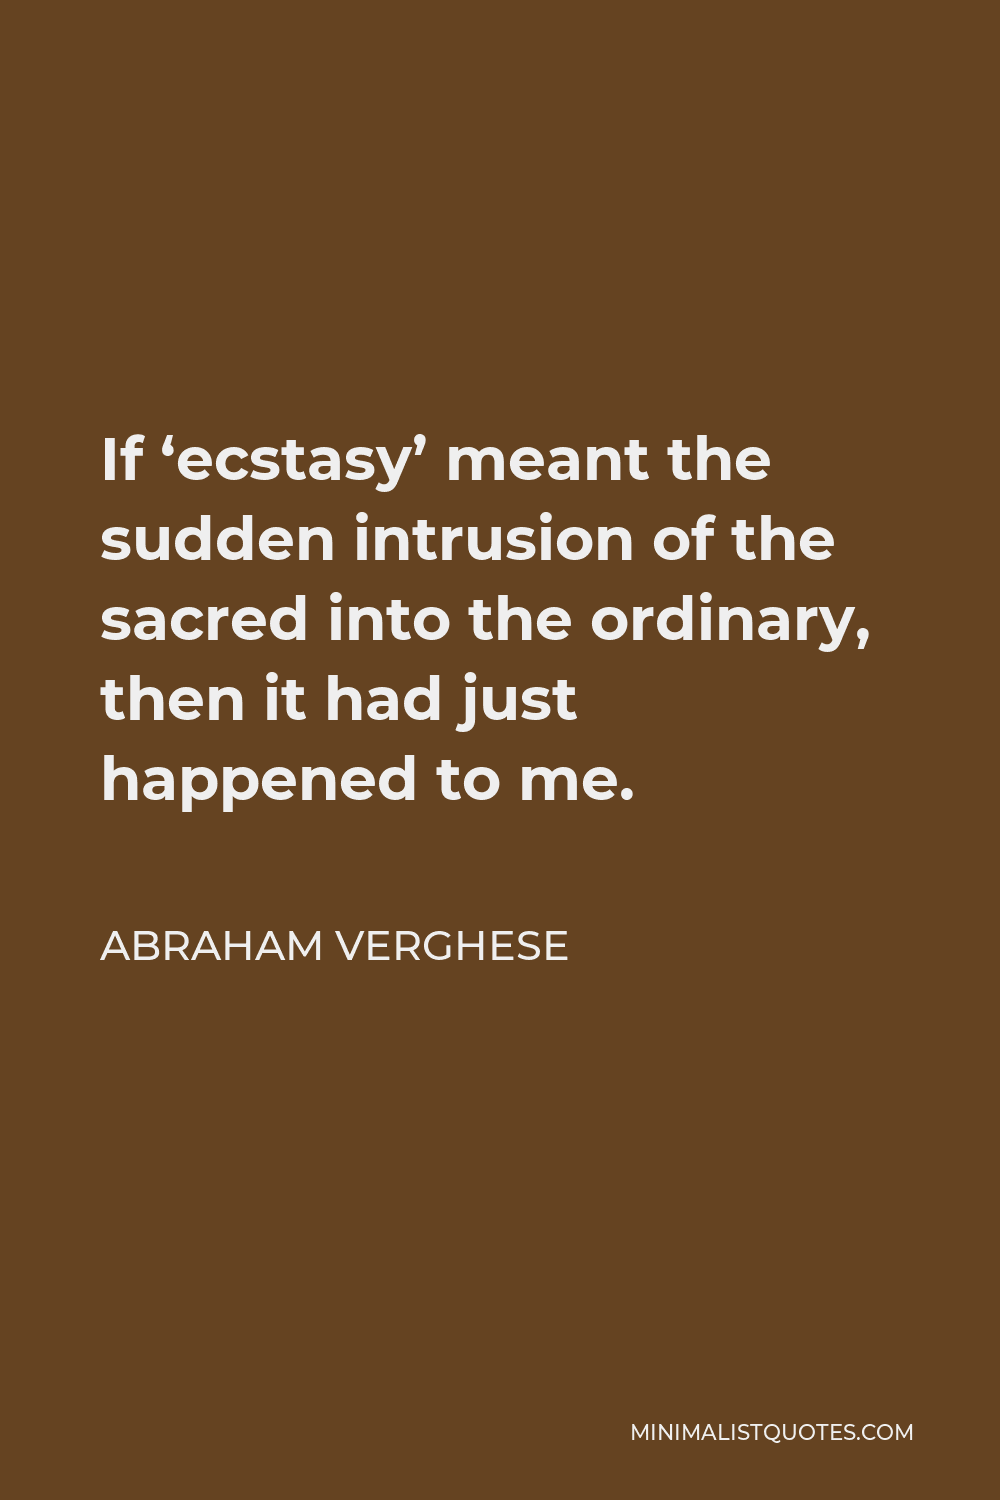 Abraham Verghese Quote - If ‘ecstasy’ meant the sudden intrusion of the sacred into the ordinary, then it had just happened to me.